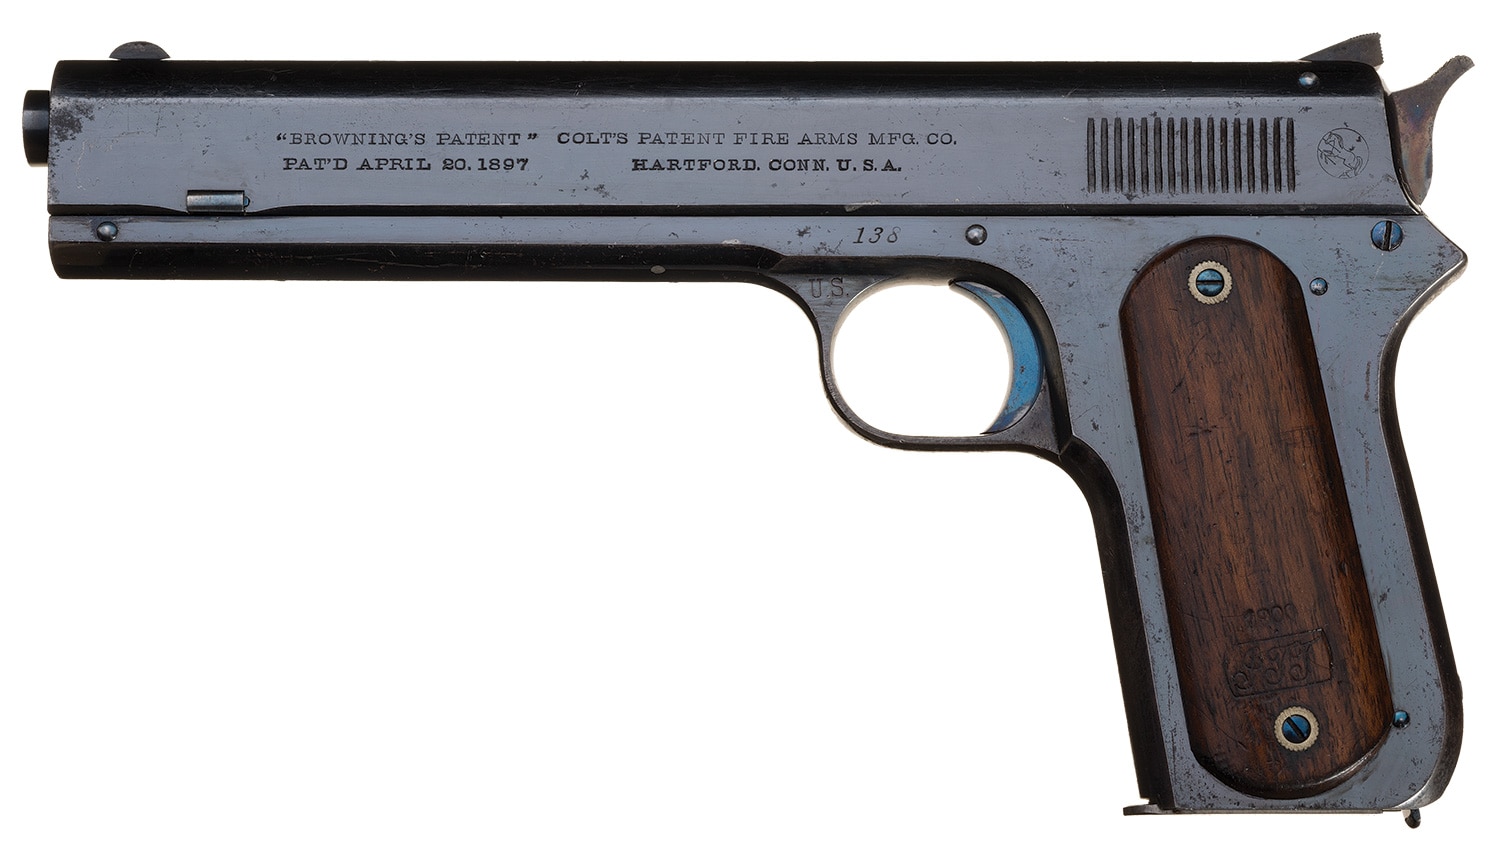 Colt Model 1900 Automatic us army